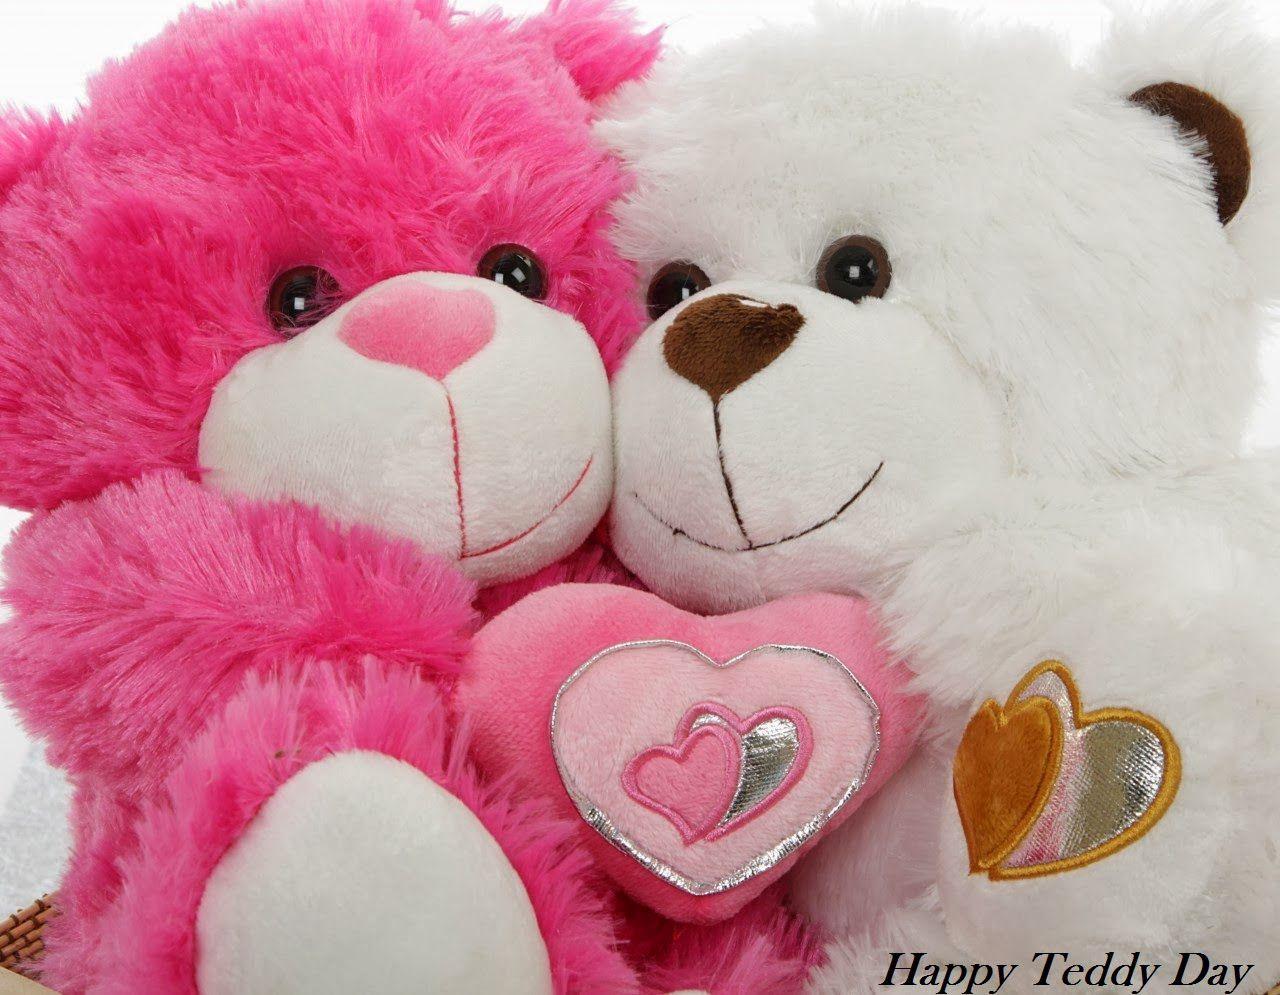 Cute Pink Teddy Bear Wallpapers For Mobile - Wallpaper Cave